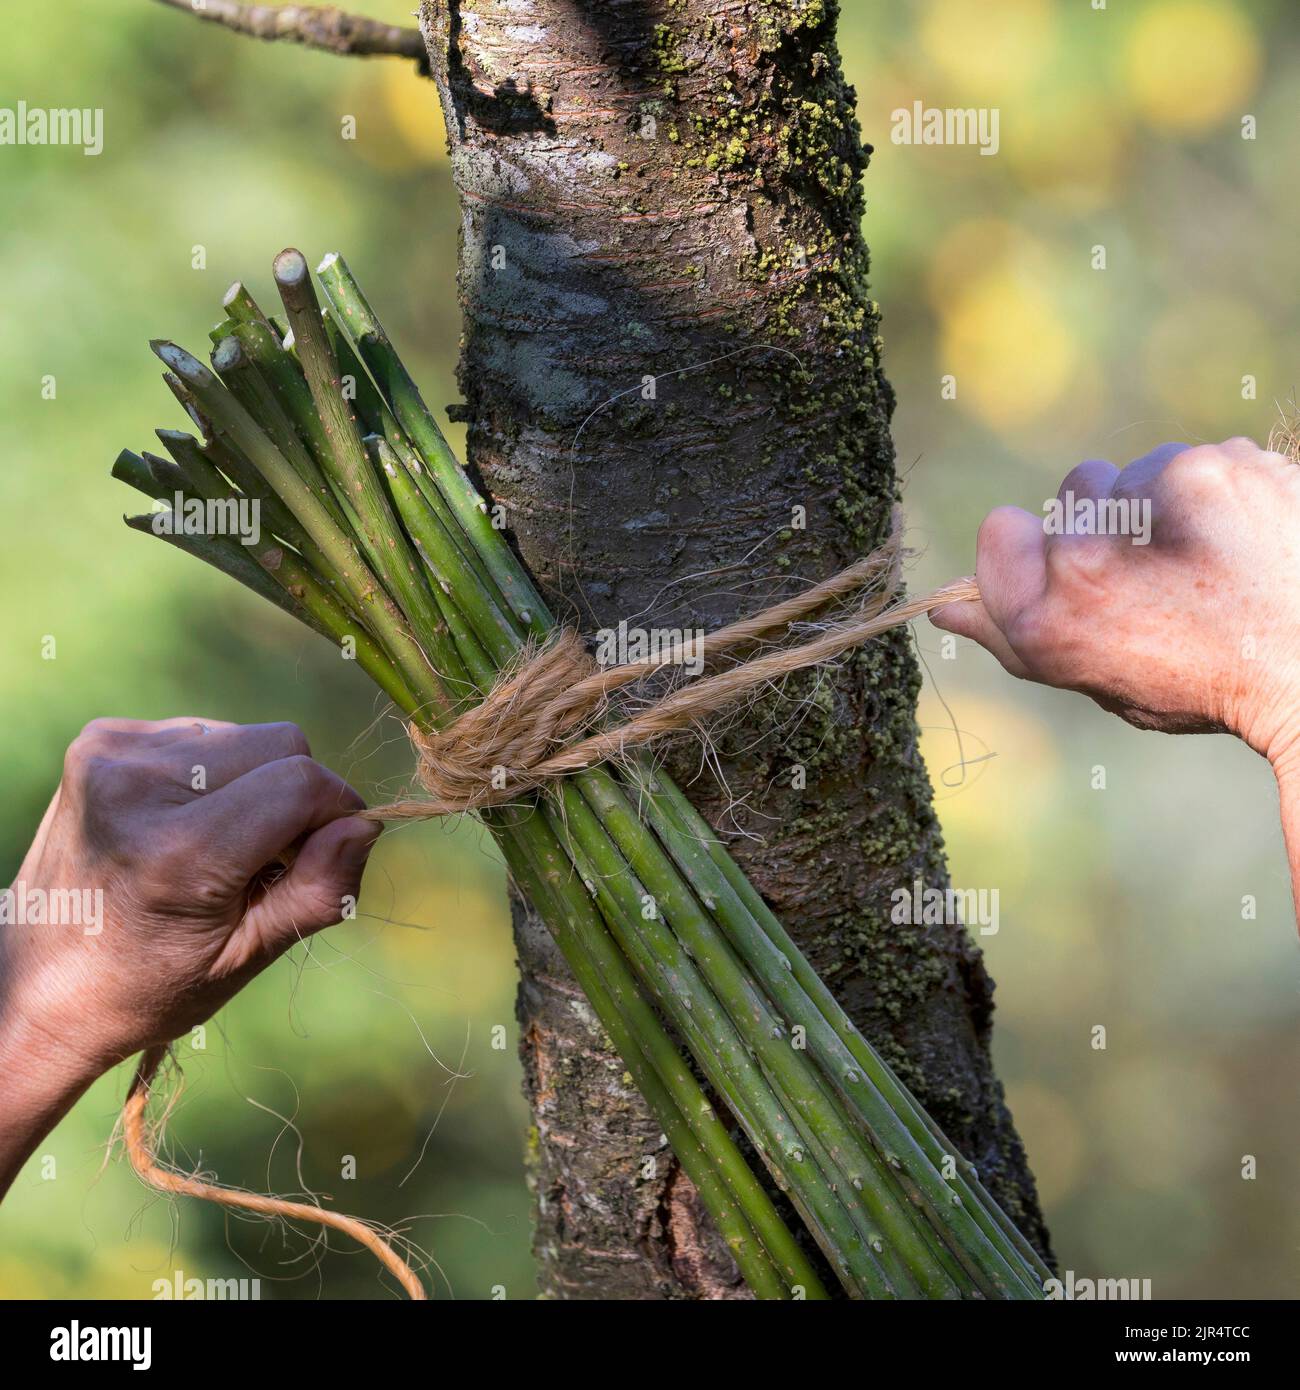 tying a nesting bag from flexible twigs and tendrils, nesting aid Stock Photo